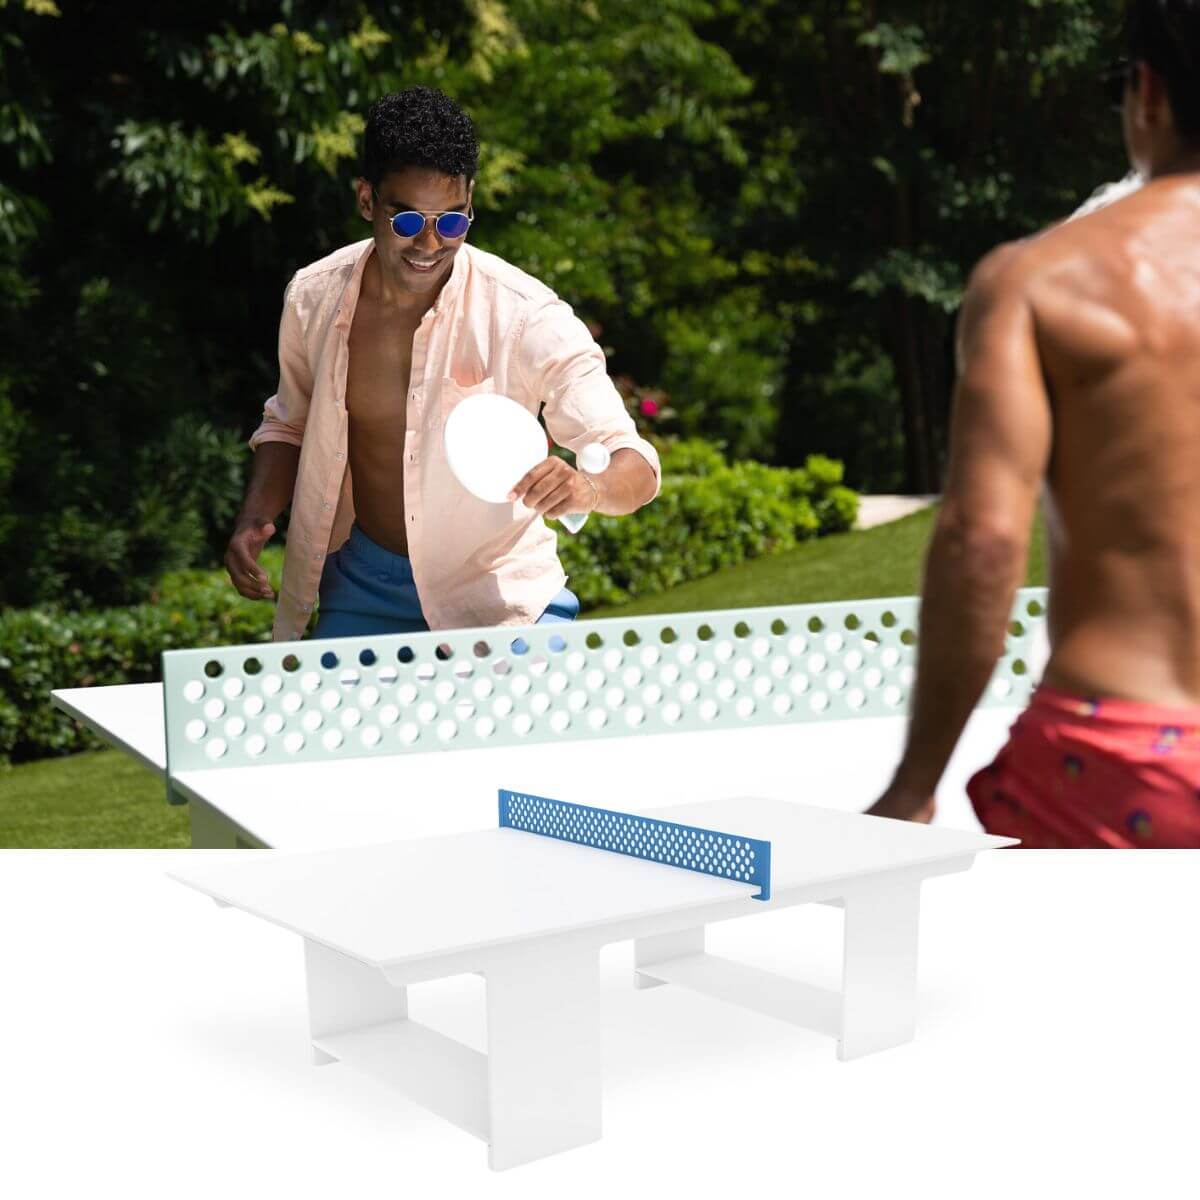 Table ping-pong extérieure - Table ping pong polyester DIABOLO